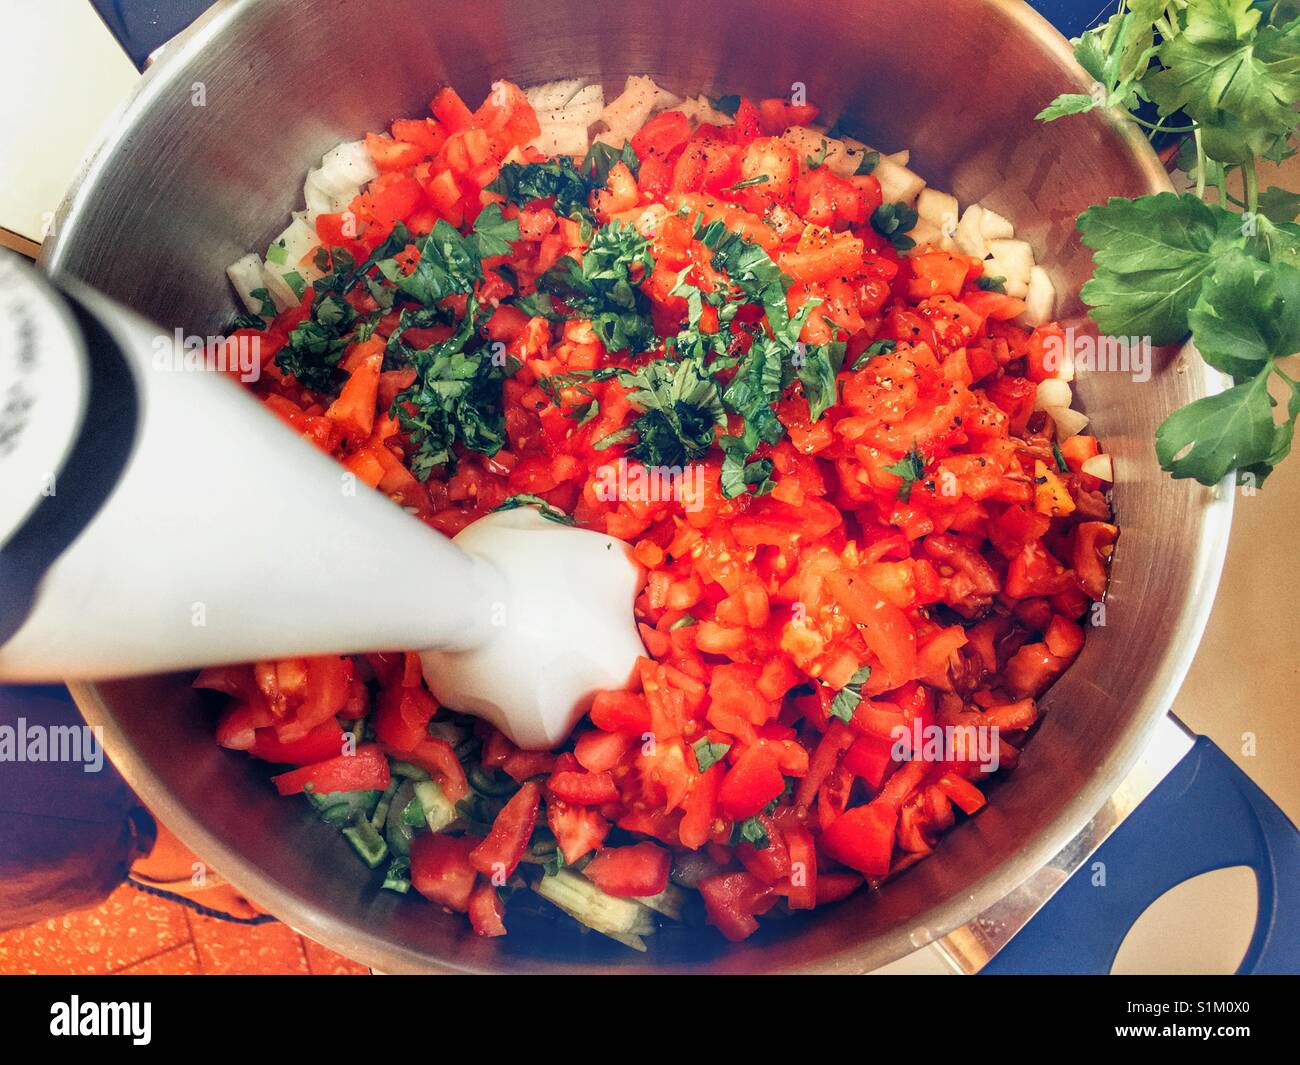 Using a hand blender to make gazpacho soup. High angle view Stock Photo